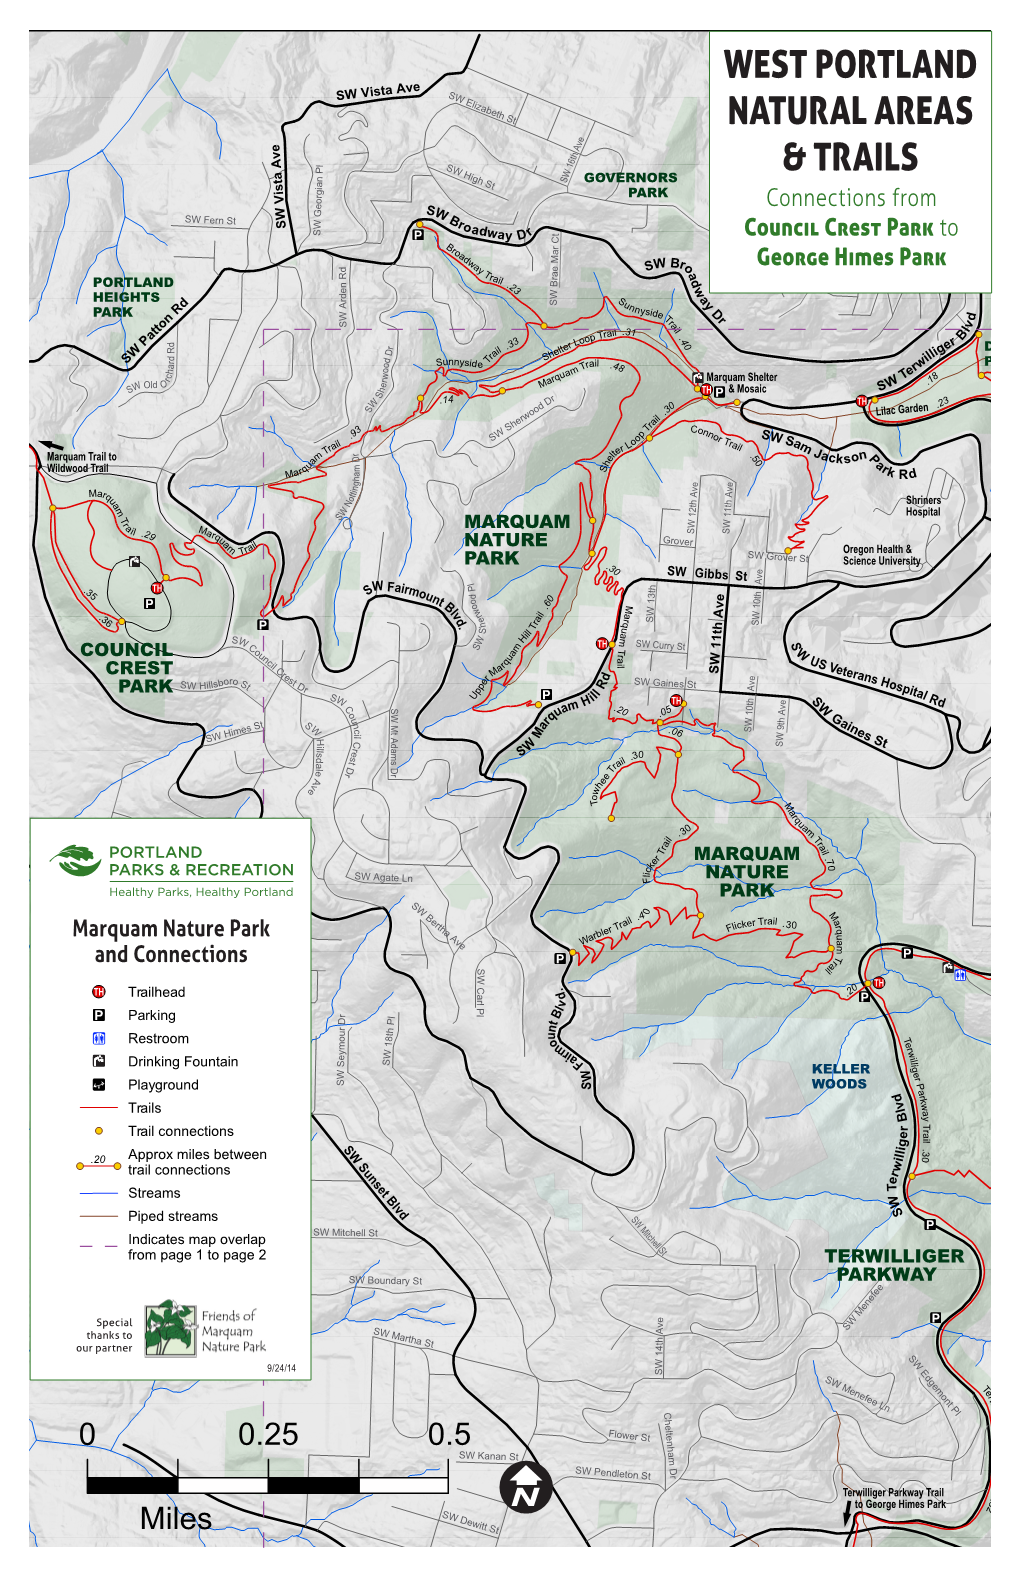 West Portland Natural Areas & Trails